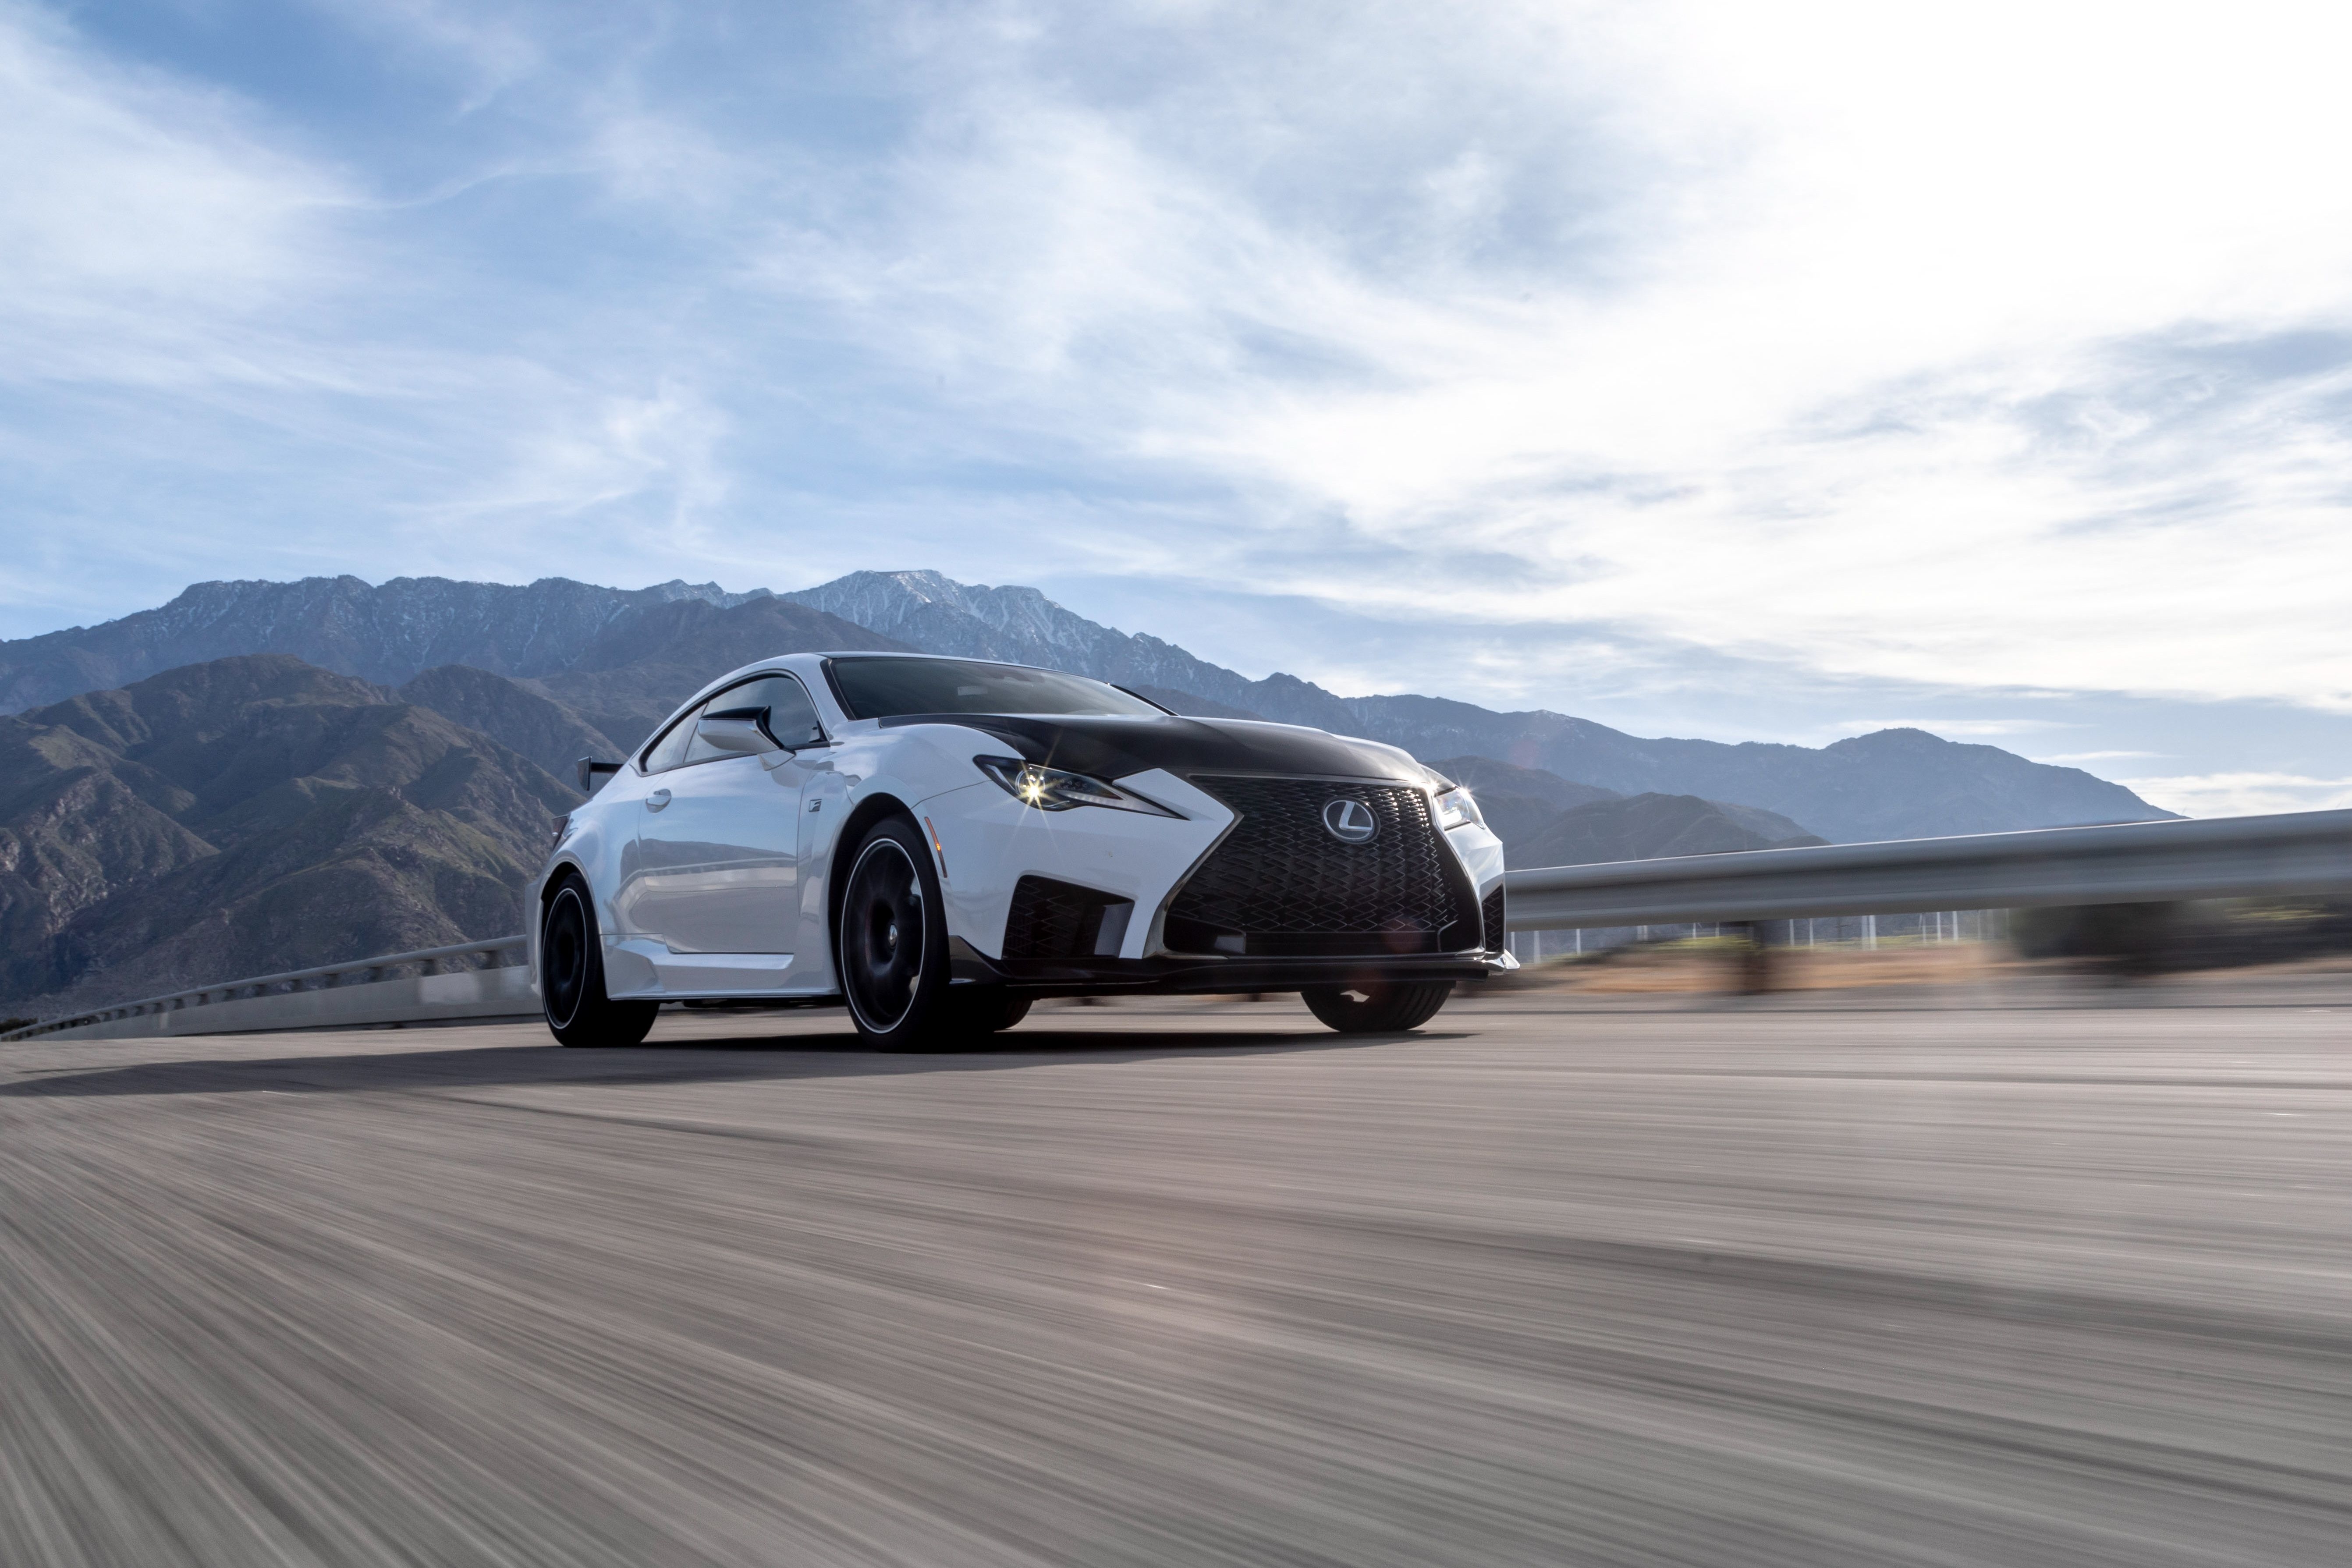 Lexus Rc F Track Edition Wallpaper Hd Cars 4k Wallpapers Images Photos And Background Wallpapers Den